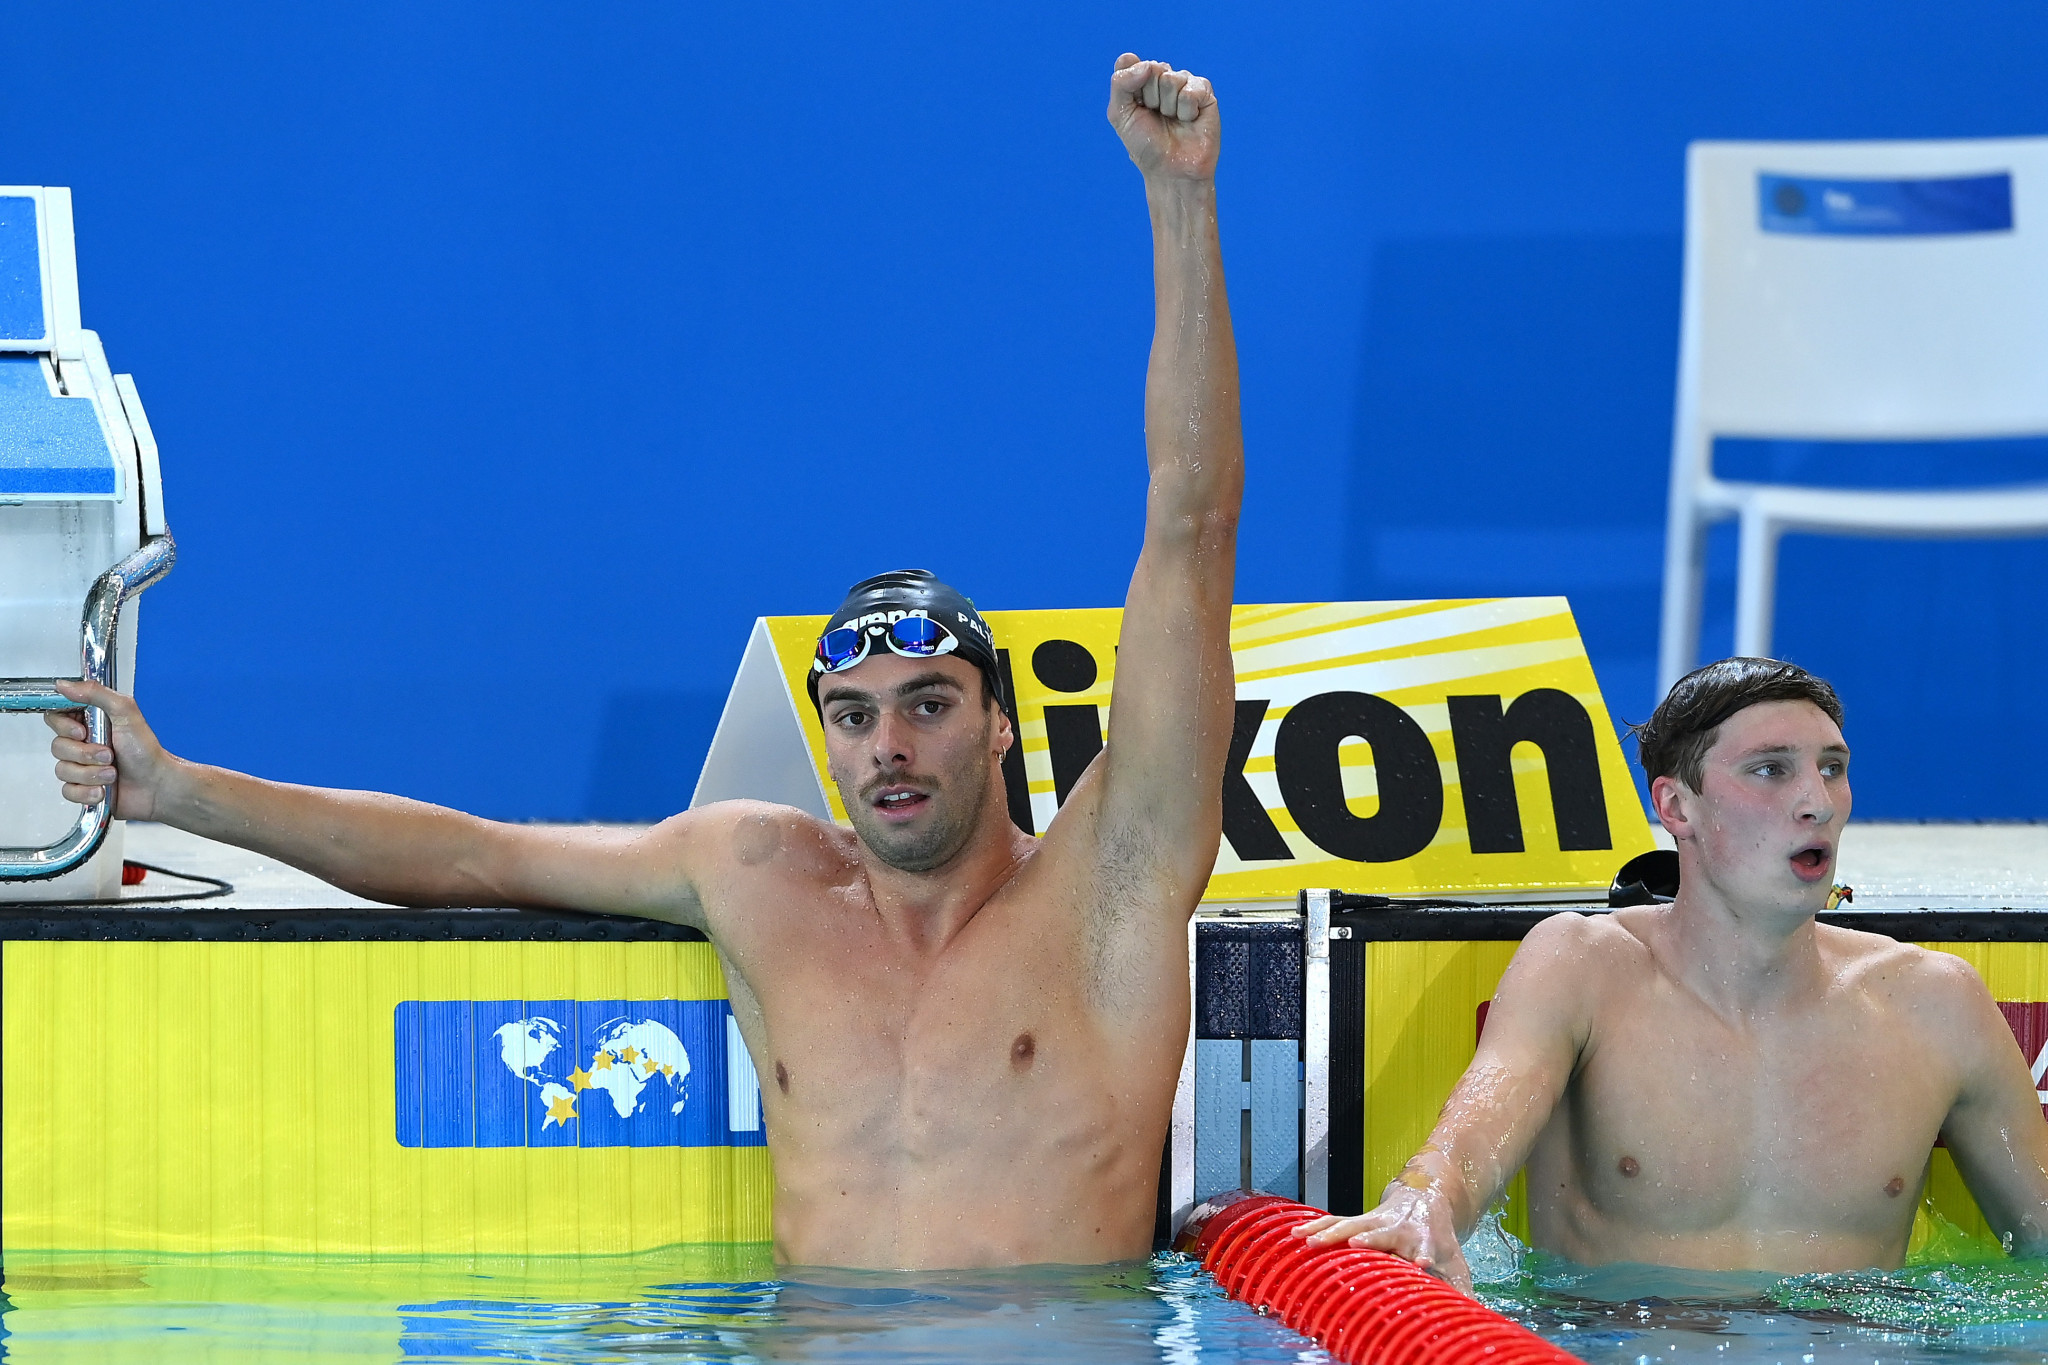 Gregorio Paltrinieri won Italy's second gold of the night when he was crowned men's 800m freestyle champion ©Getty Images